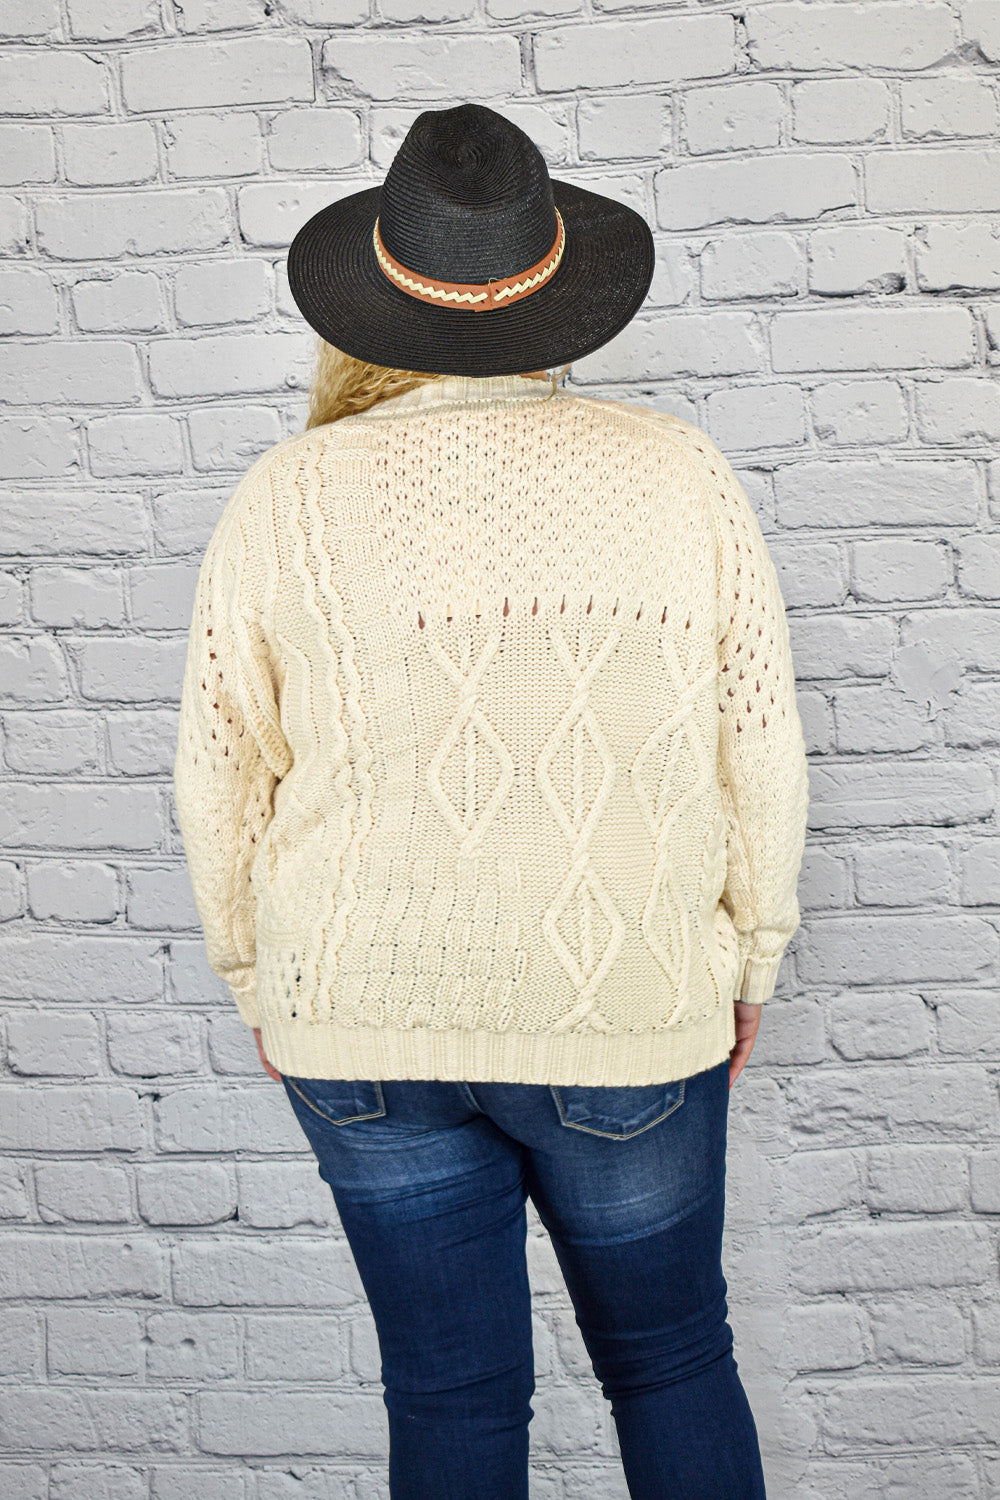 Cream Cable Knit Sweater in Plus Size by Entro Clothing